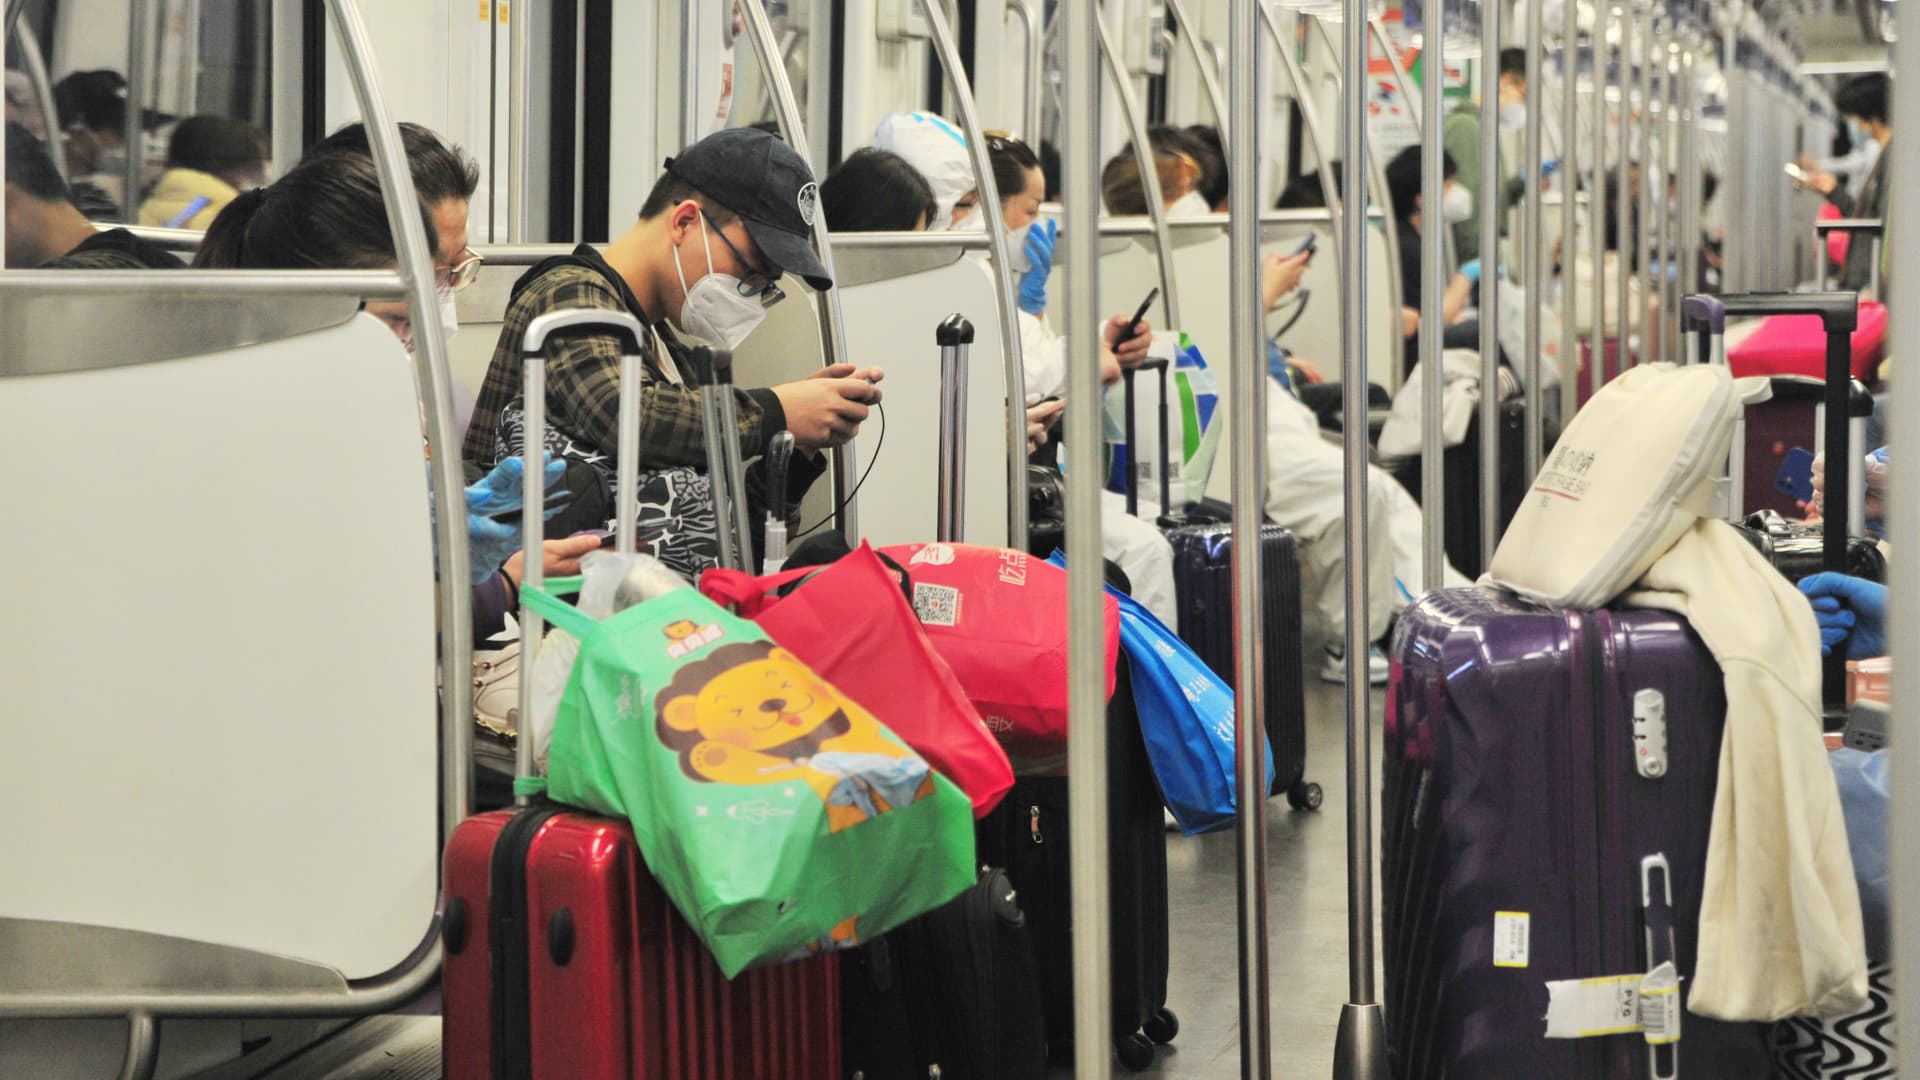 After about two months of lockdown, Shanghai announced plans over the weekend to relax restrictions on business activity. Subway riders pictured here on May 28, 2022, ride on one of four lines in the city that have resumed operations.